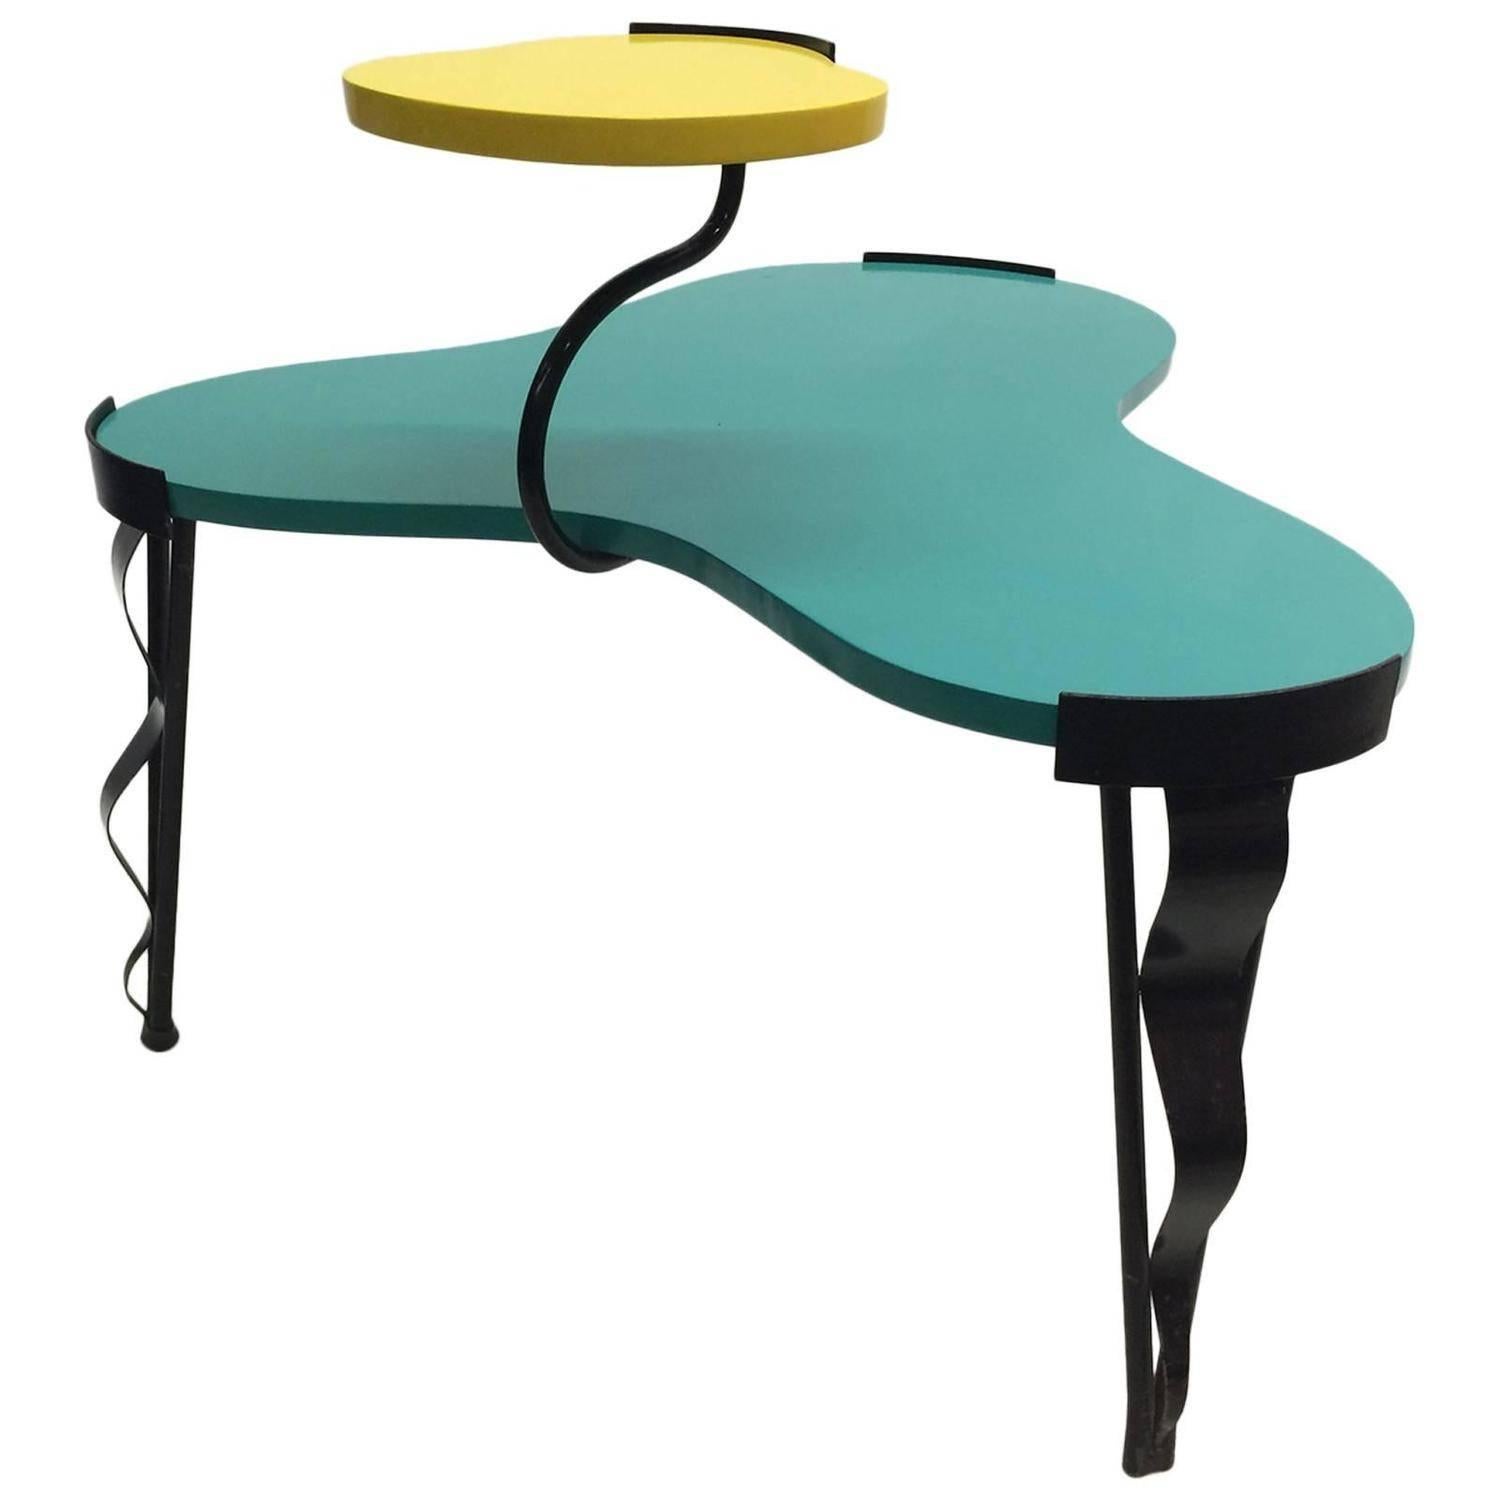 Post-Modern Memphis Inspired Side Tables by Harry Siegel, Set of Two